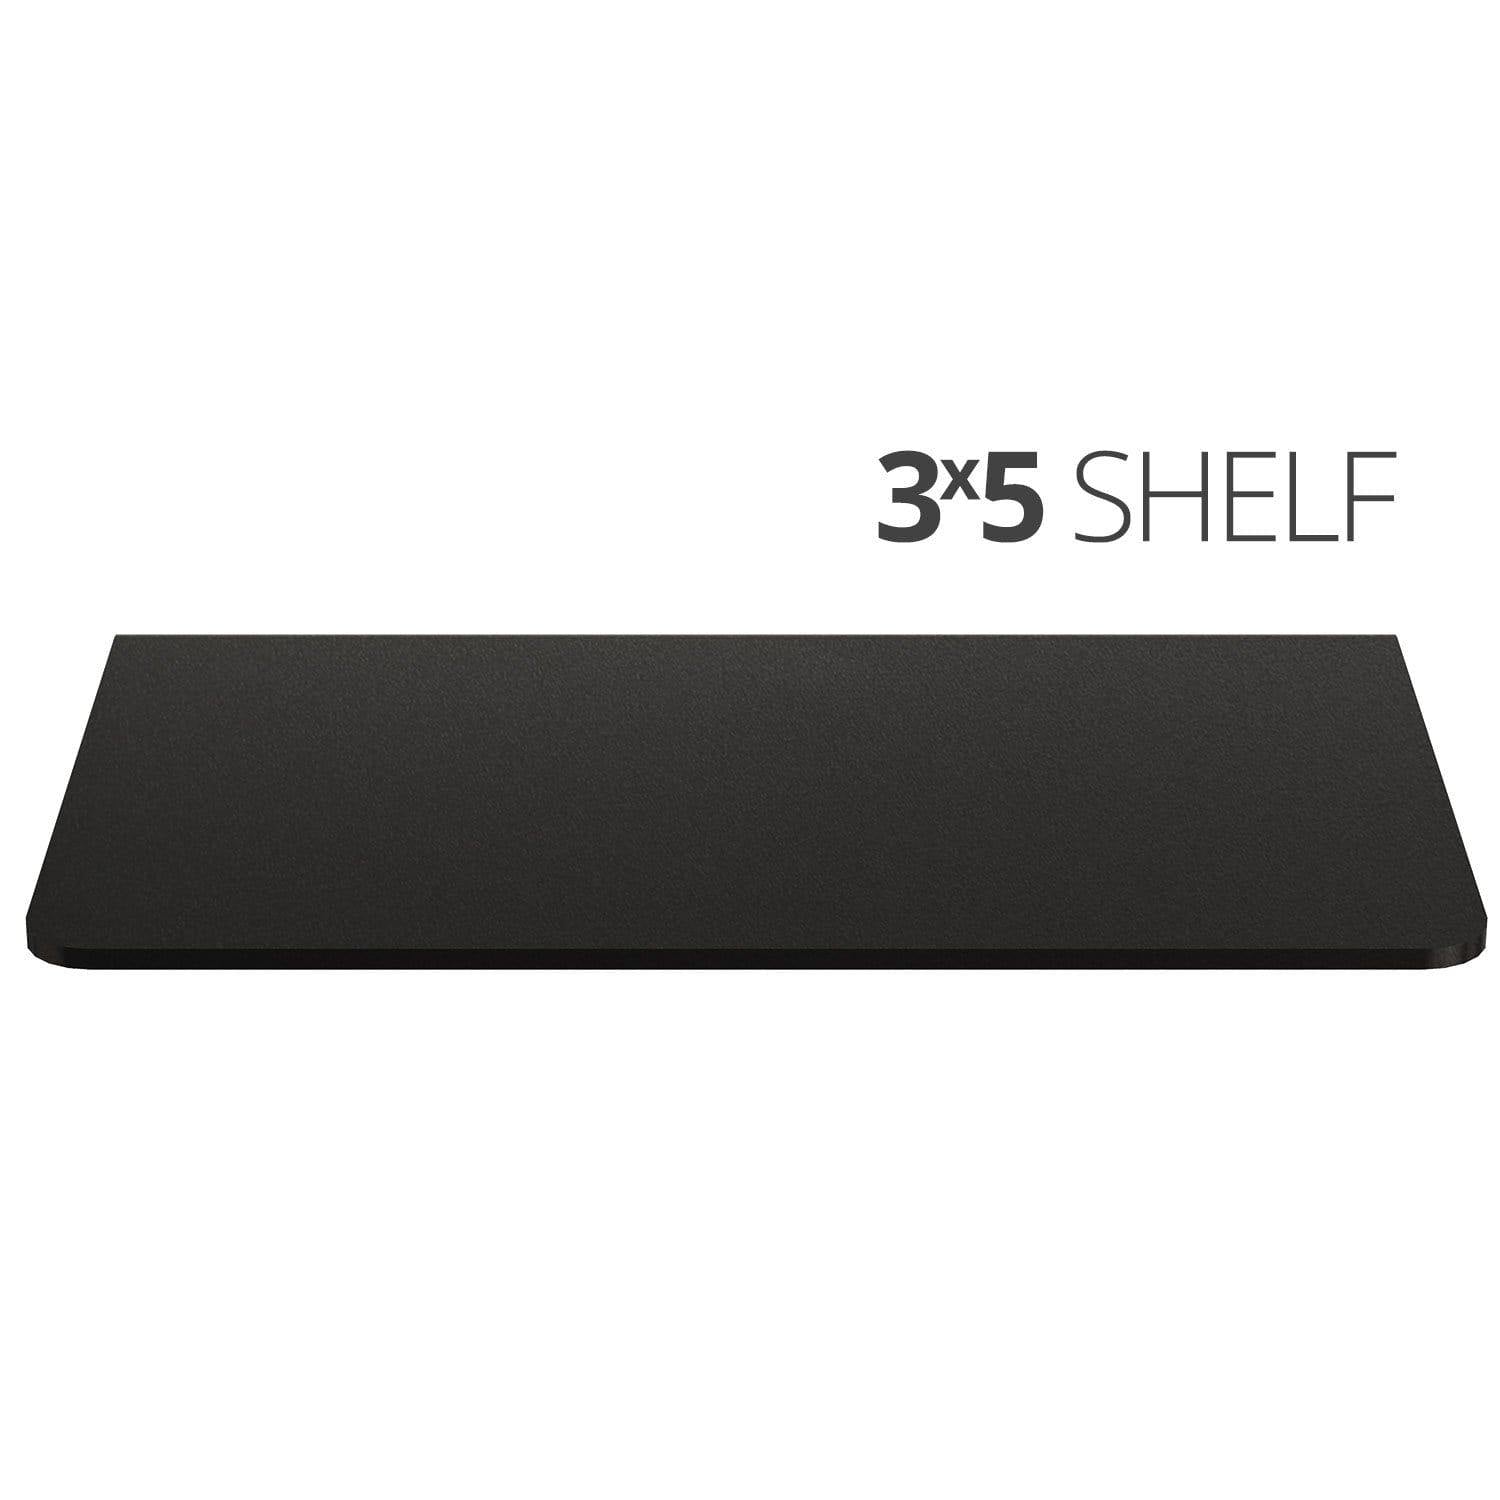 Small wall mounted shelf for home, office and garage - 3x5 top